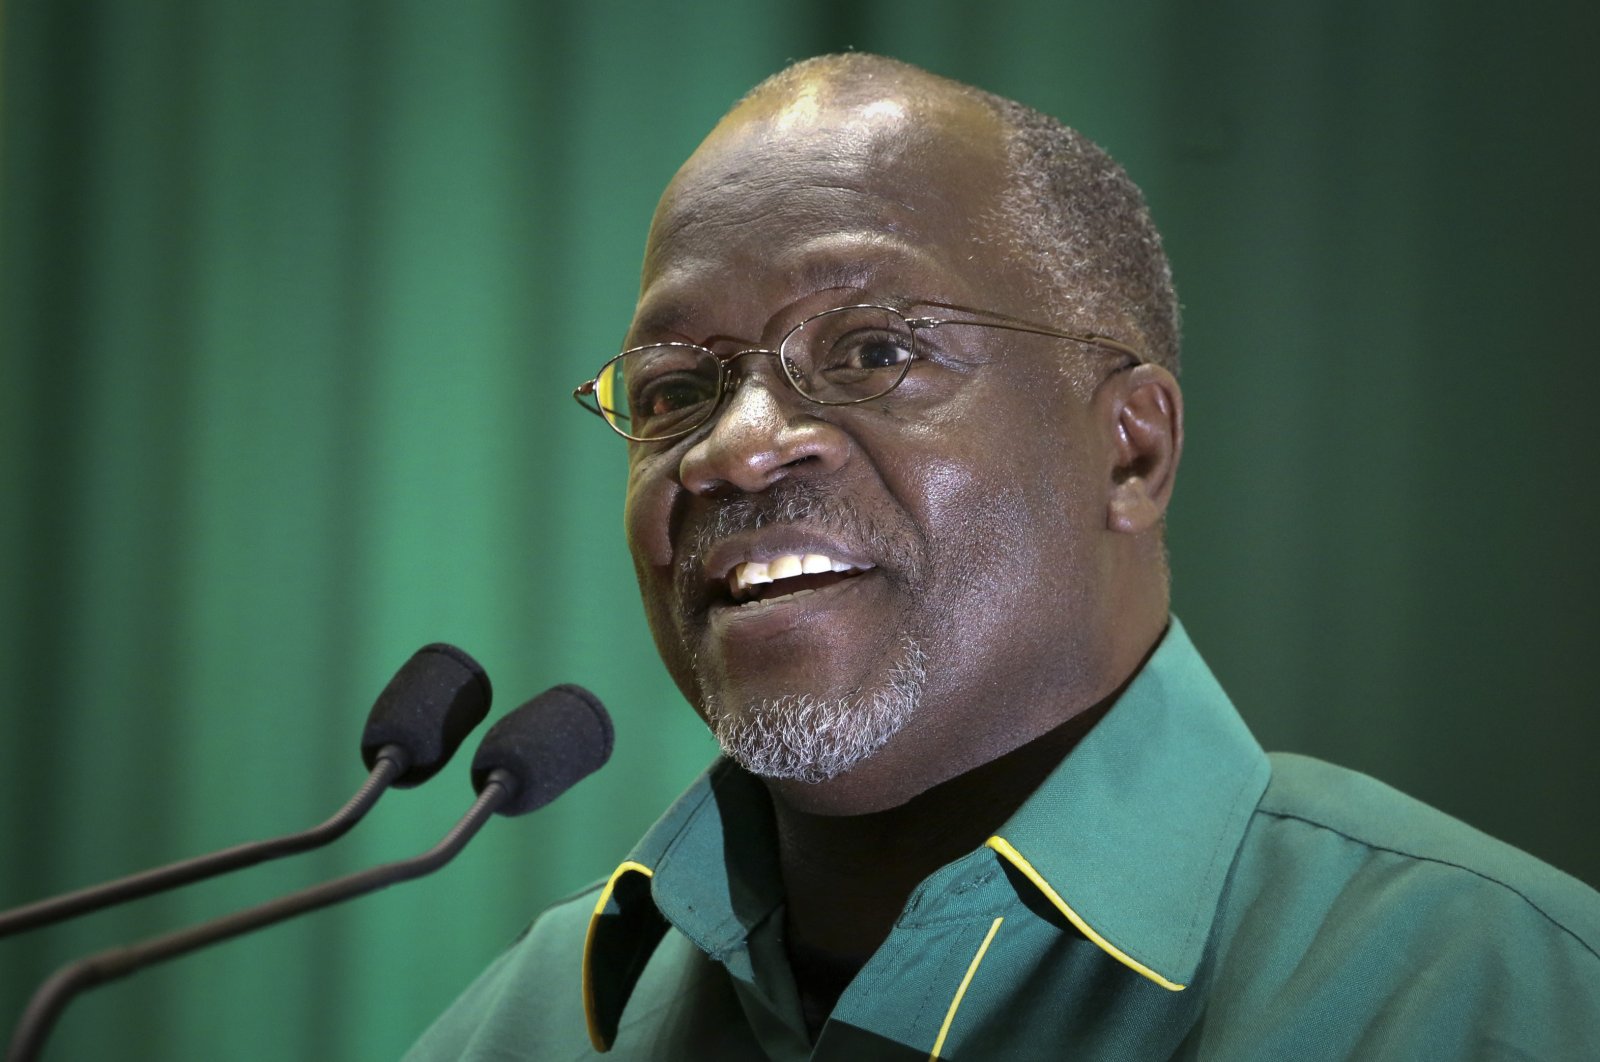 In this Saturday, July 11, 2015 file photo, Tanzania's then public works minister and presidential candidate John Magufuli speaks at an internal party poll to decide the ruling Chama Cha Mapinduzi (CCM) party's presidential candidate, which they later chose him to be, in Dodoma, Tanzania. (AP Photo)